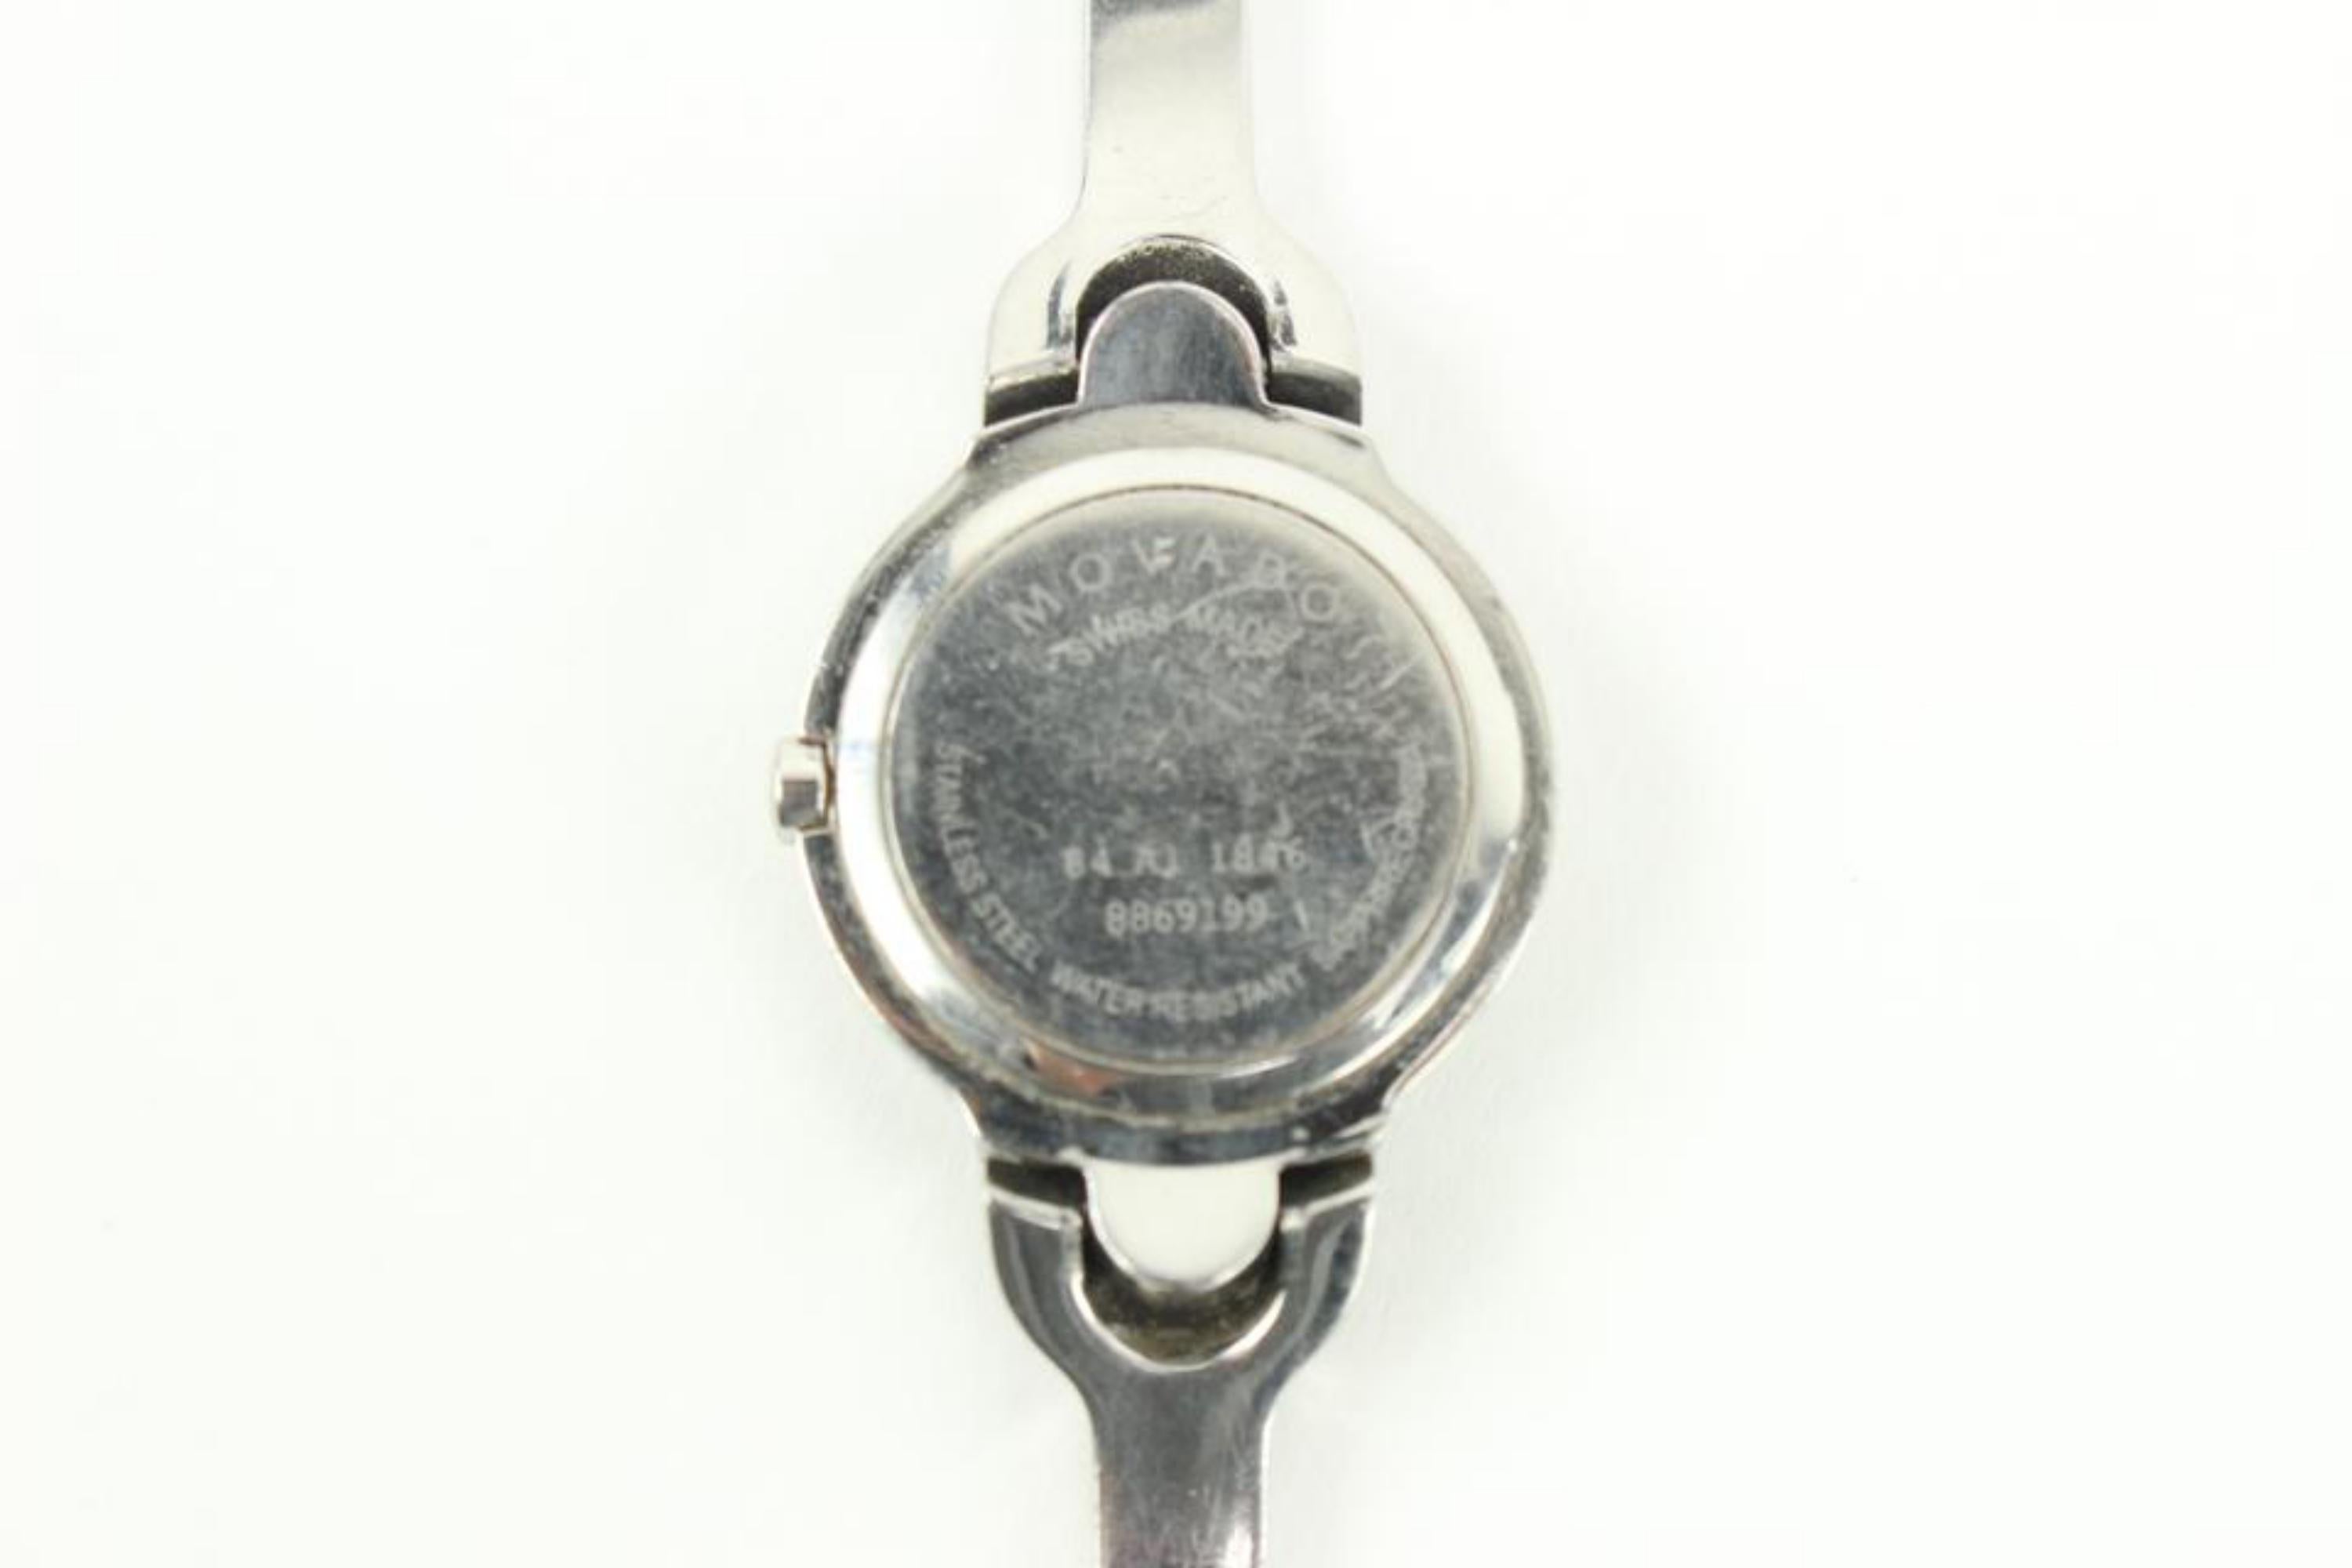 Movado Women's 84 A1 1846 Amorosa Kara Watch 47MO217S In Good Condition For Sale In Dix hills, NY